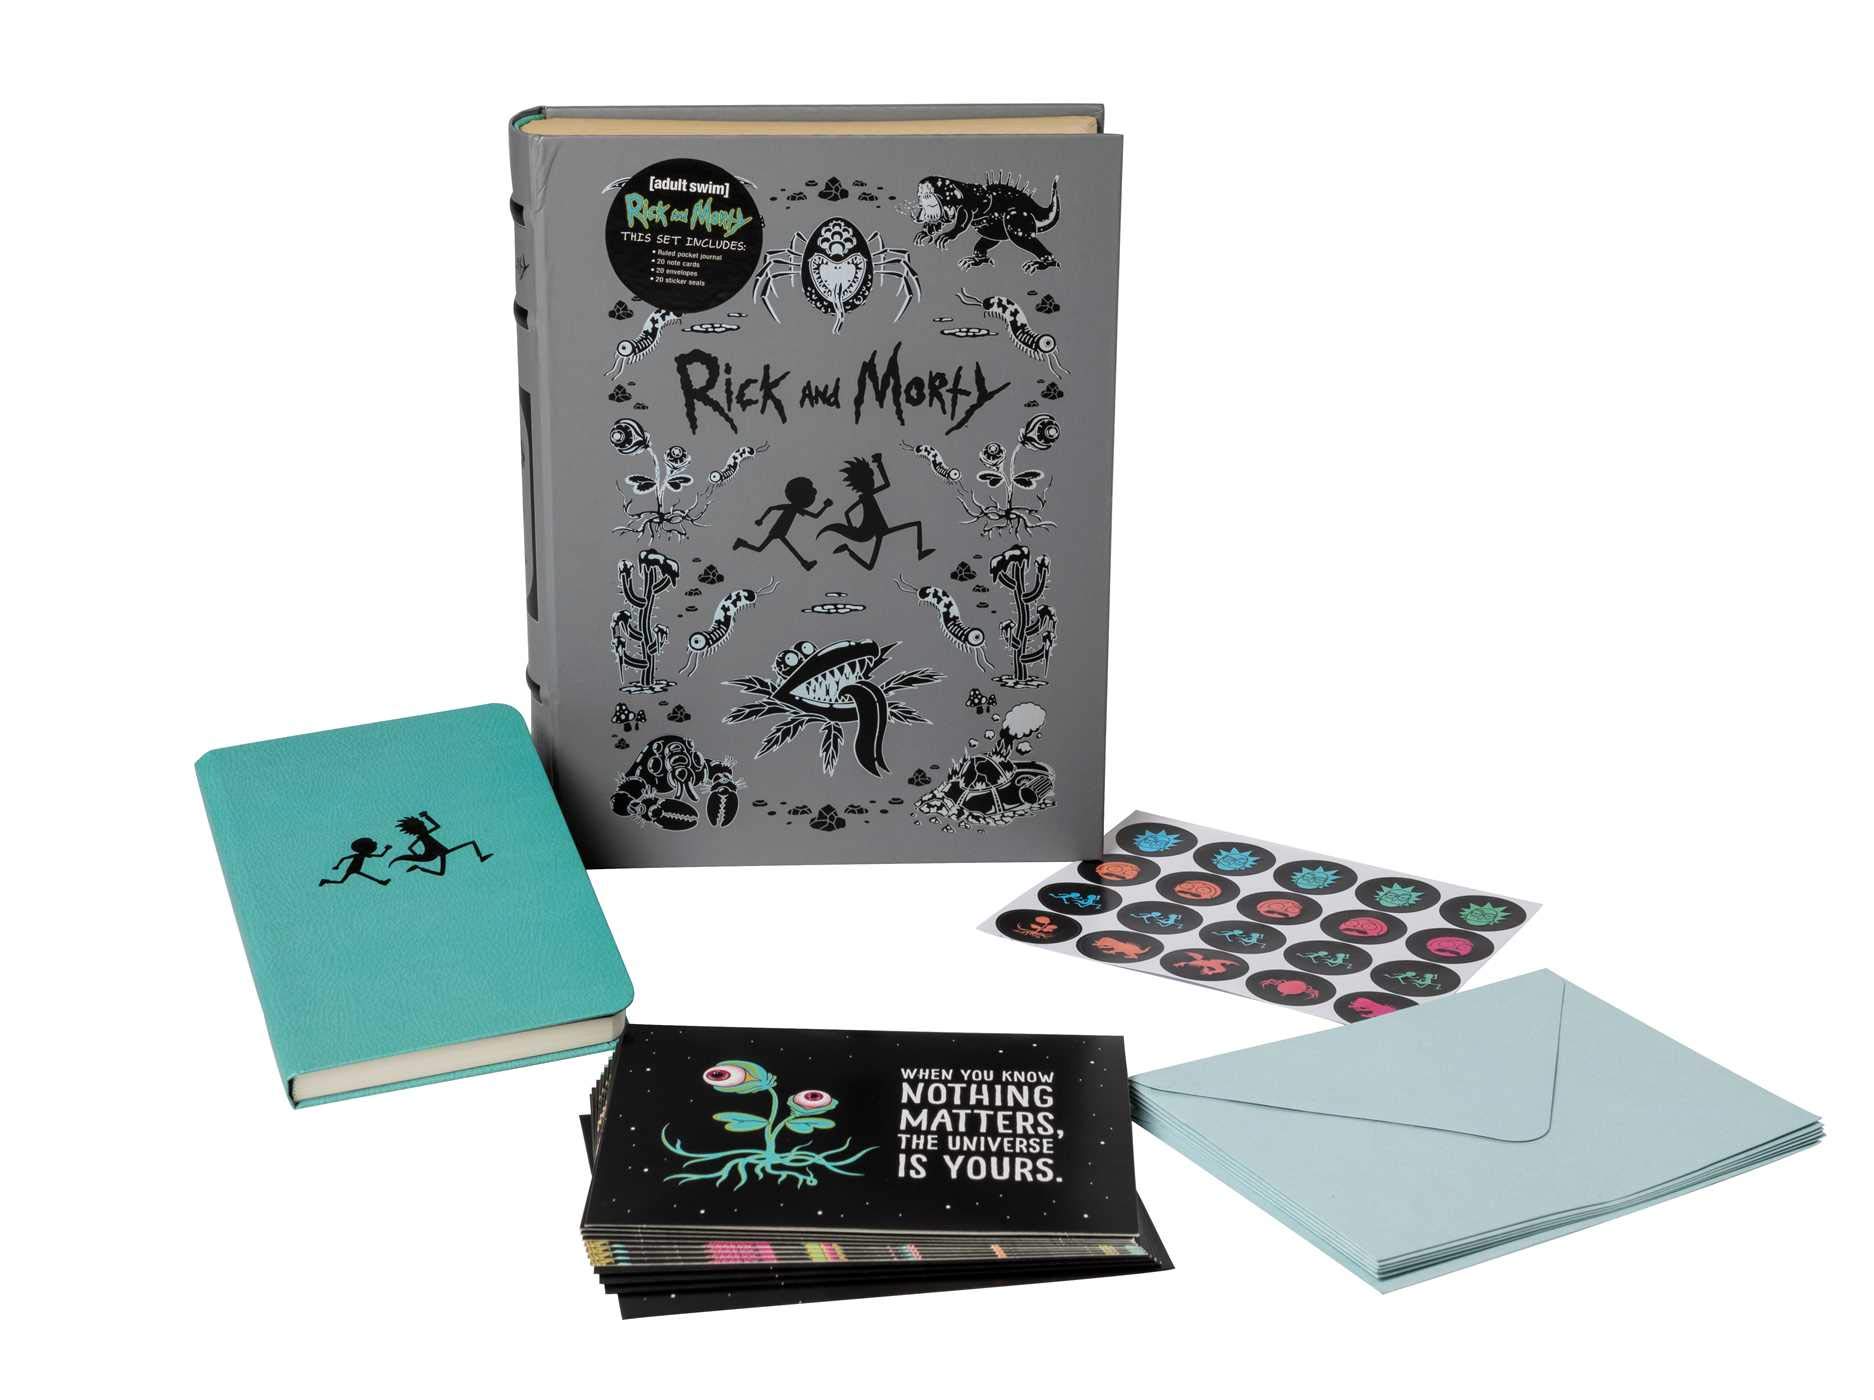 Rick and Morty Deluxe Set - Insight Editions